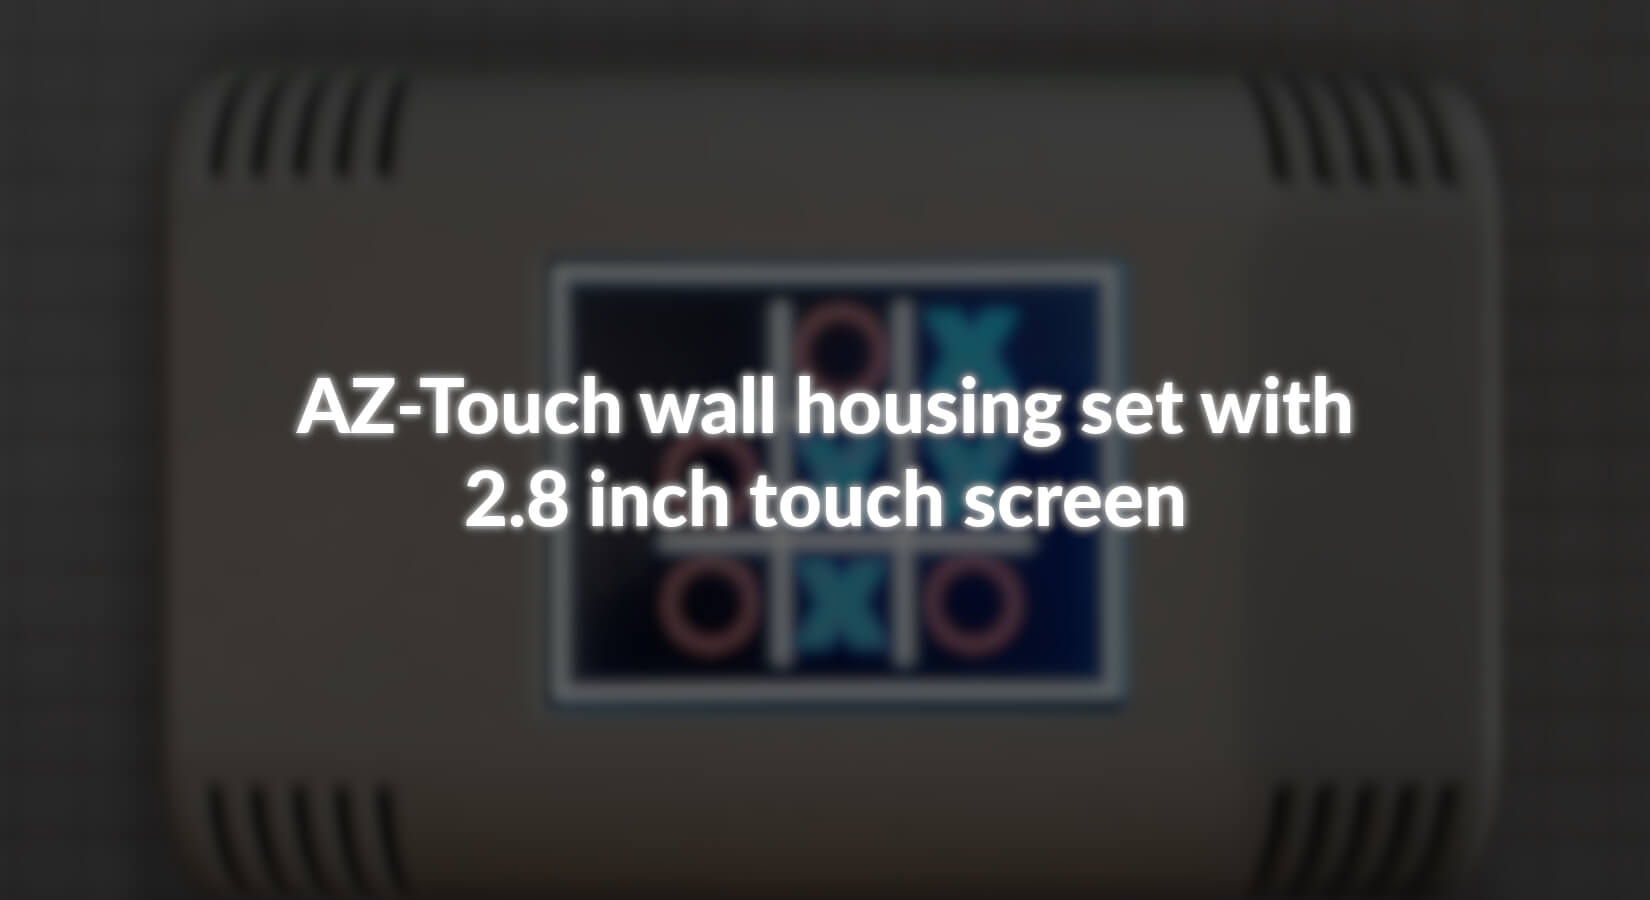 AZ-Touch wall housing set with 2.8 inch touch screen - AZ-Delivery